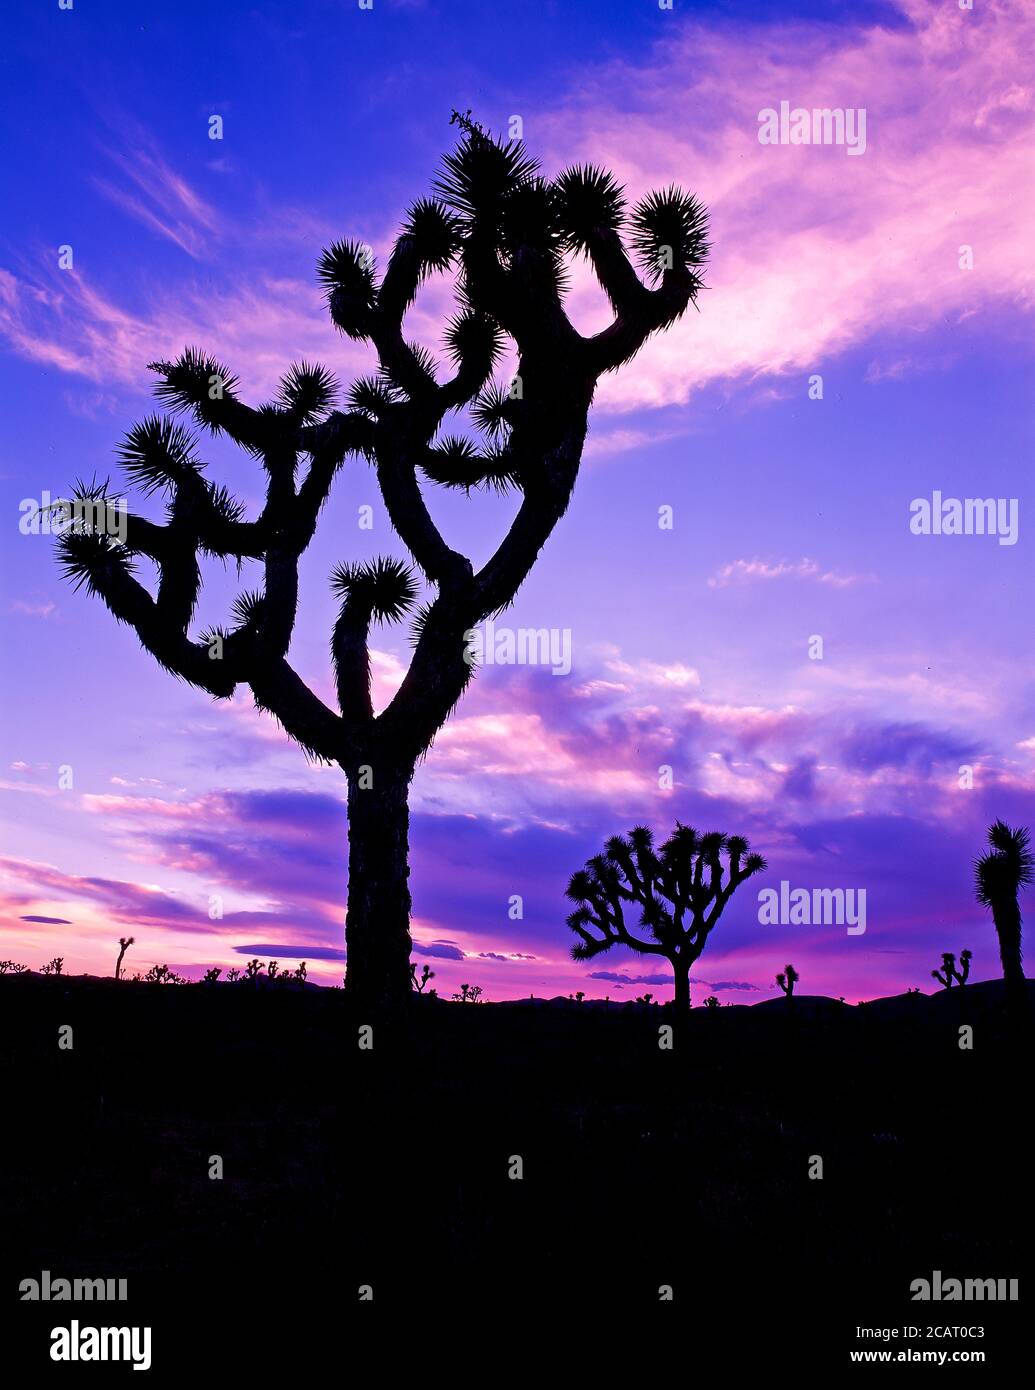 Silhouetted Joshua Trees aganist a colorful sunset sky in Joshua Tree National Park in southeastern California un the United States Stock Photo